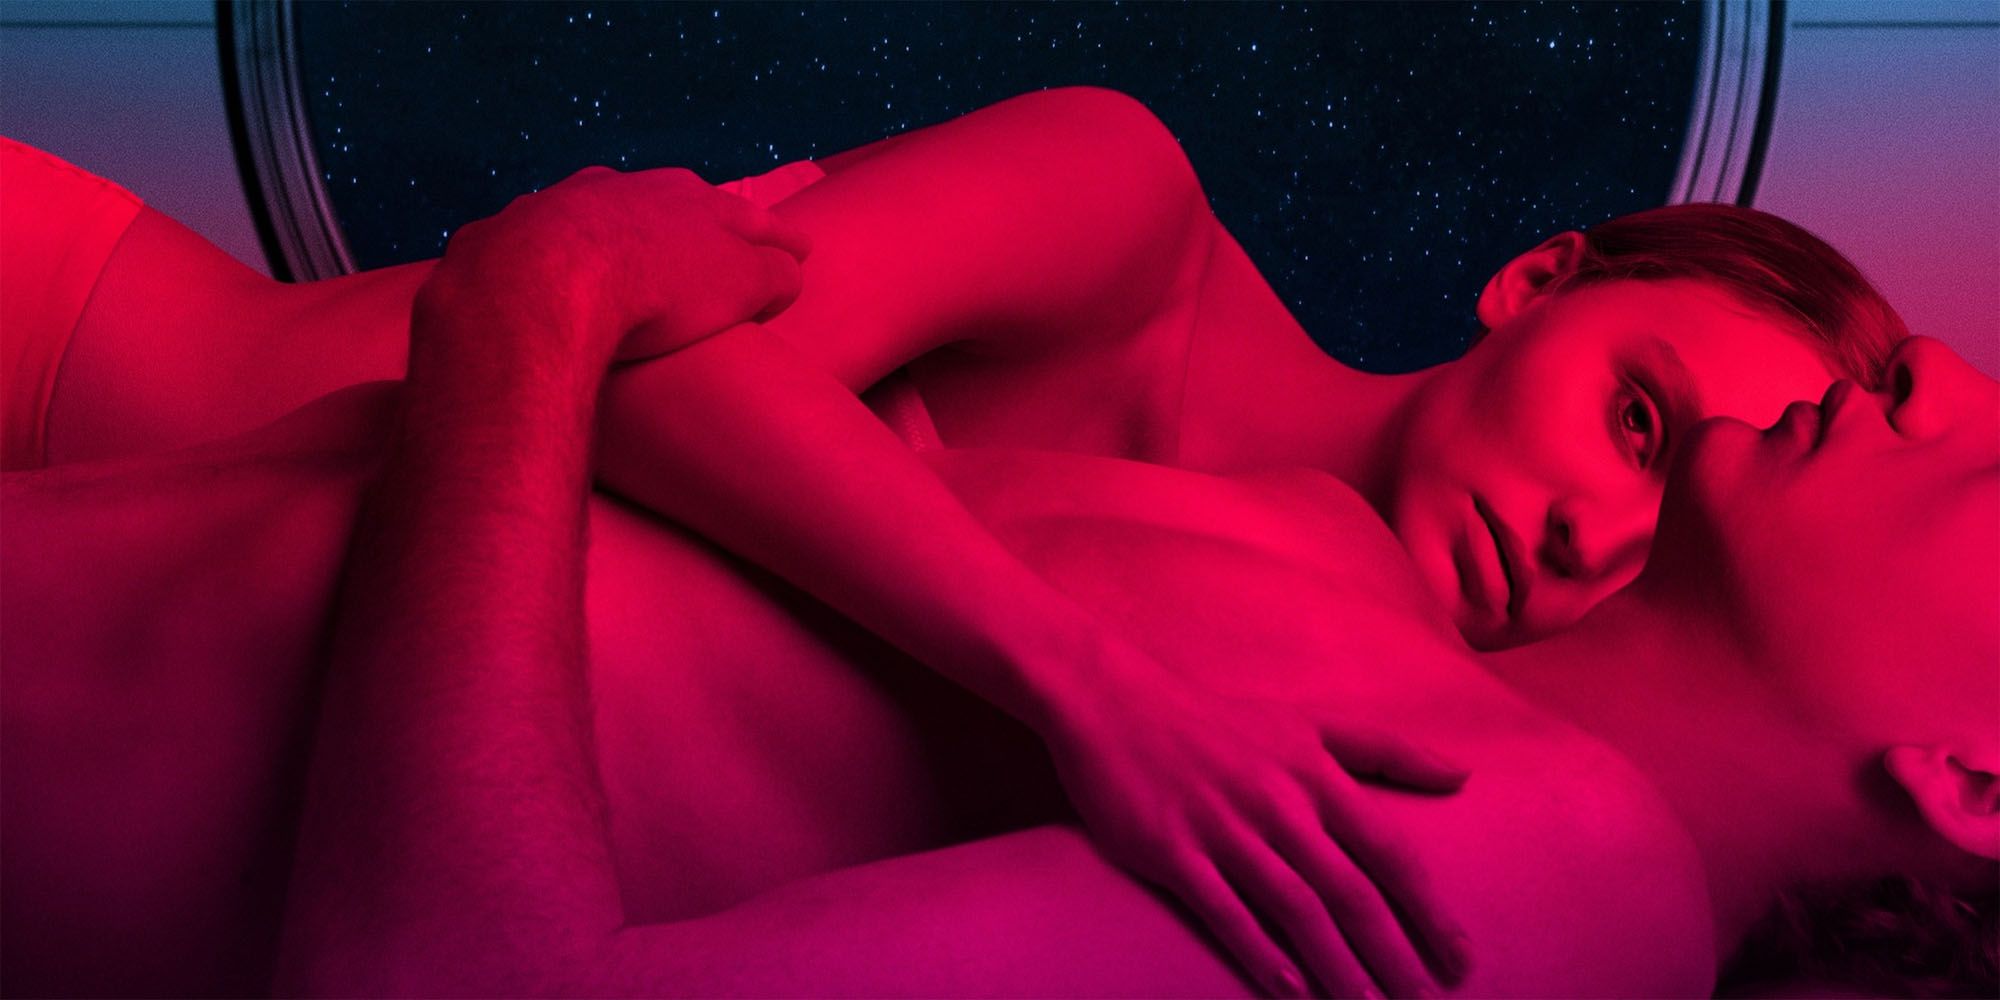 A man and woman lay together in neon light from the Voyagers poster.